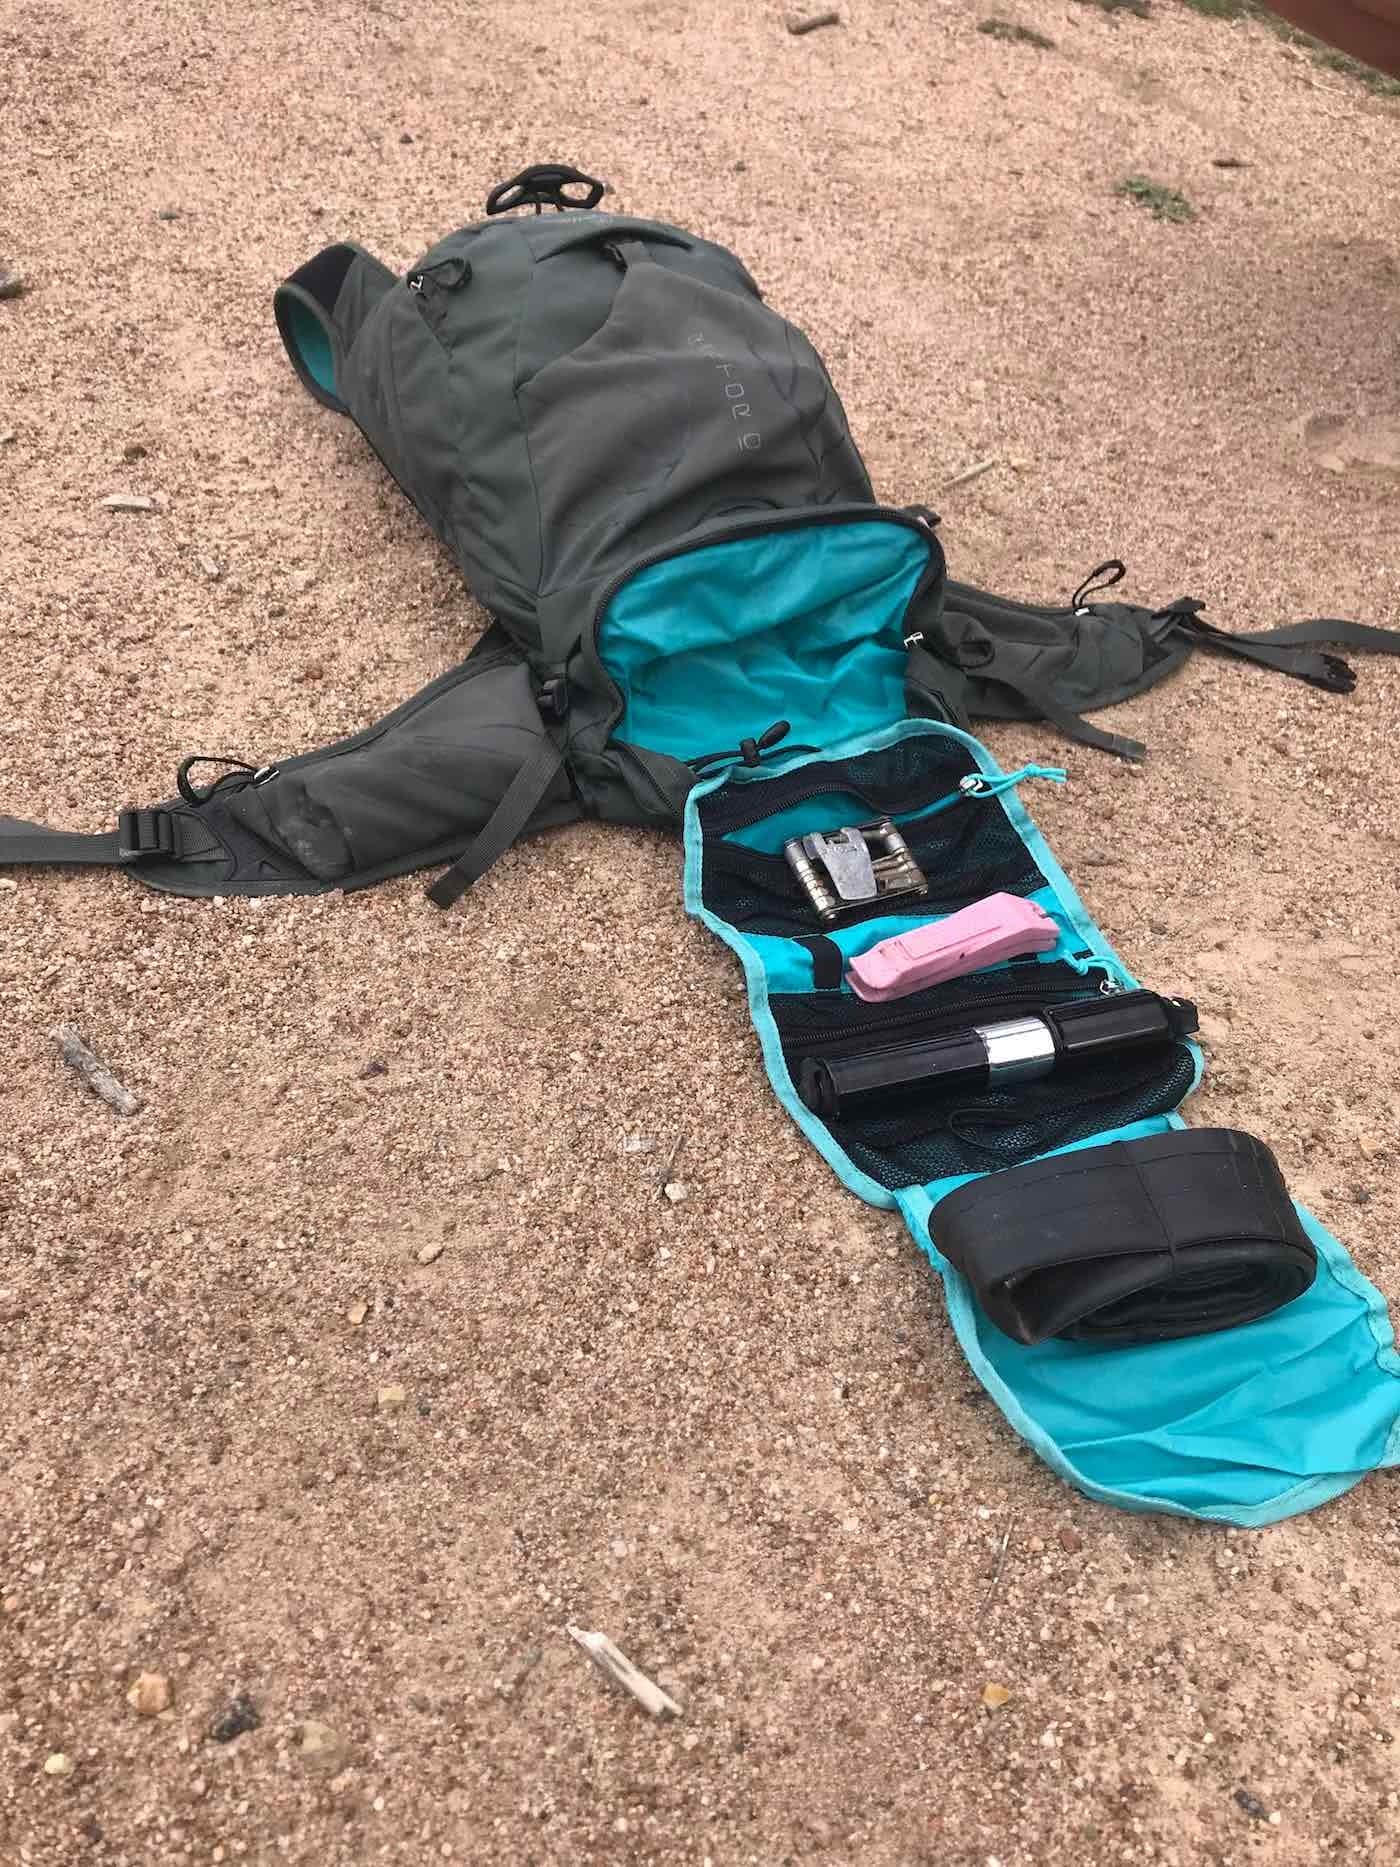 Osprey Raptor 10 Riding Pack // Gear Review by Rowan Beggs-French cycling backpack, rock garden, mountain biking, tool section